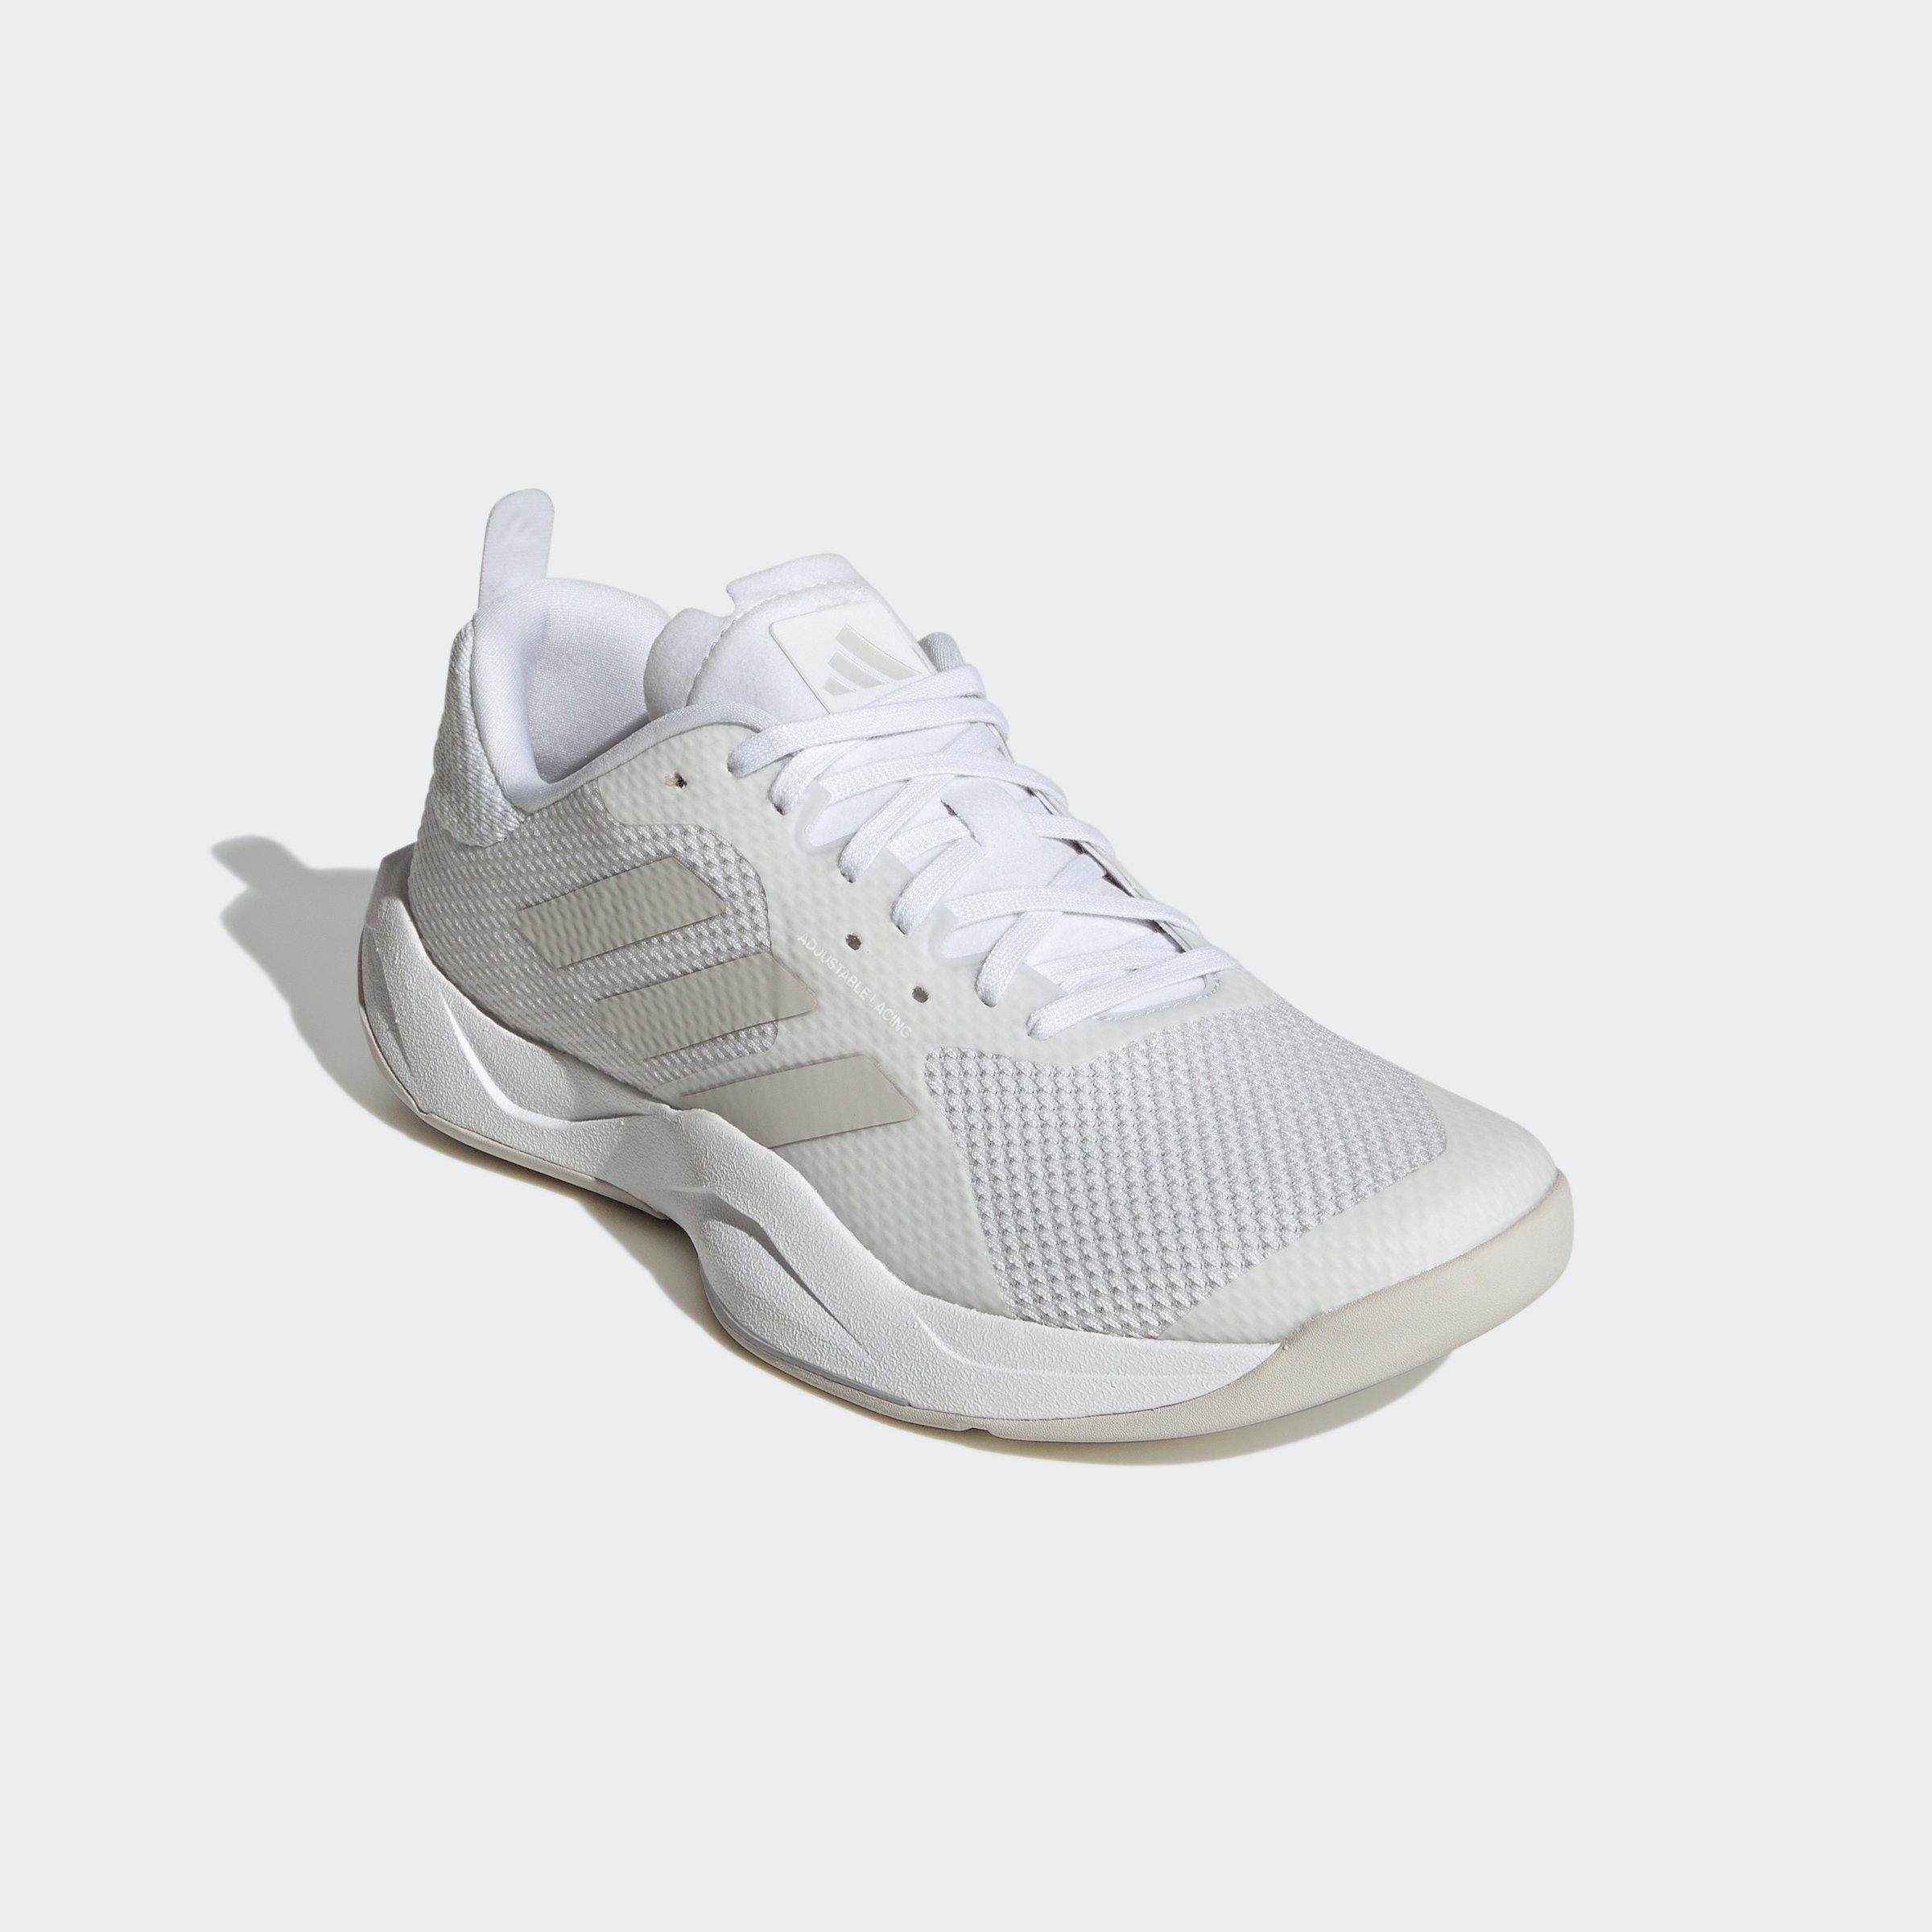 adidas Performance RAPIDMOVE TRAININGSSCHUH Fitnessschuh Cloud White / Grey One / Grey Two